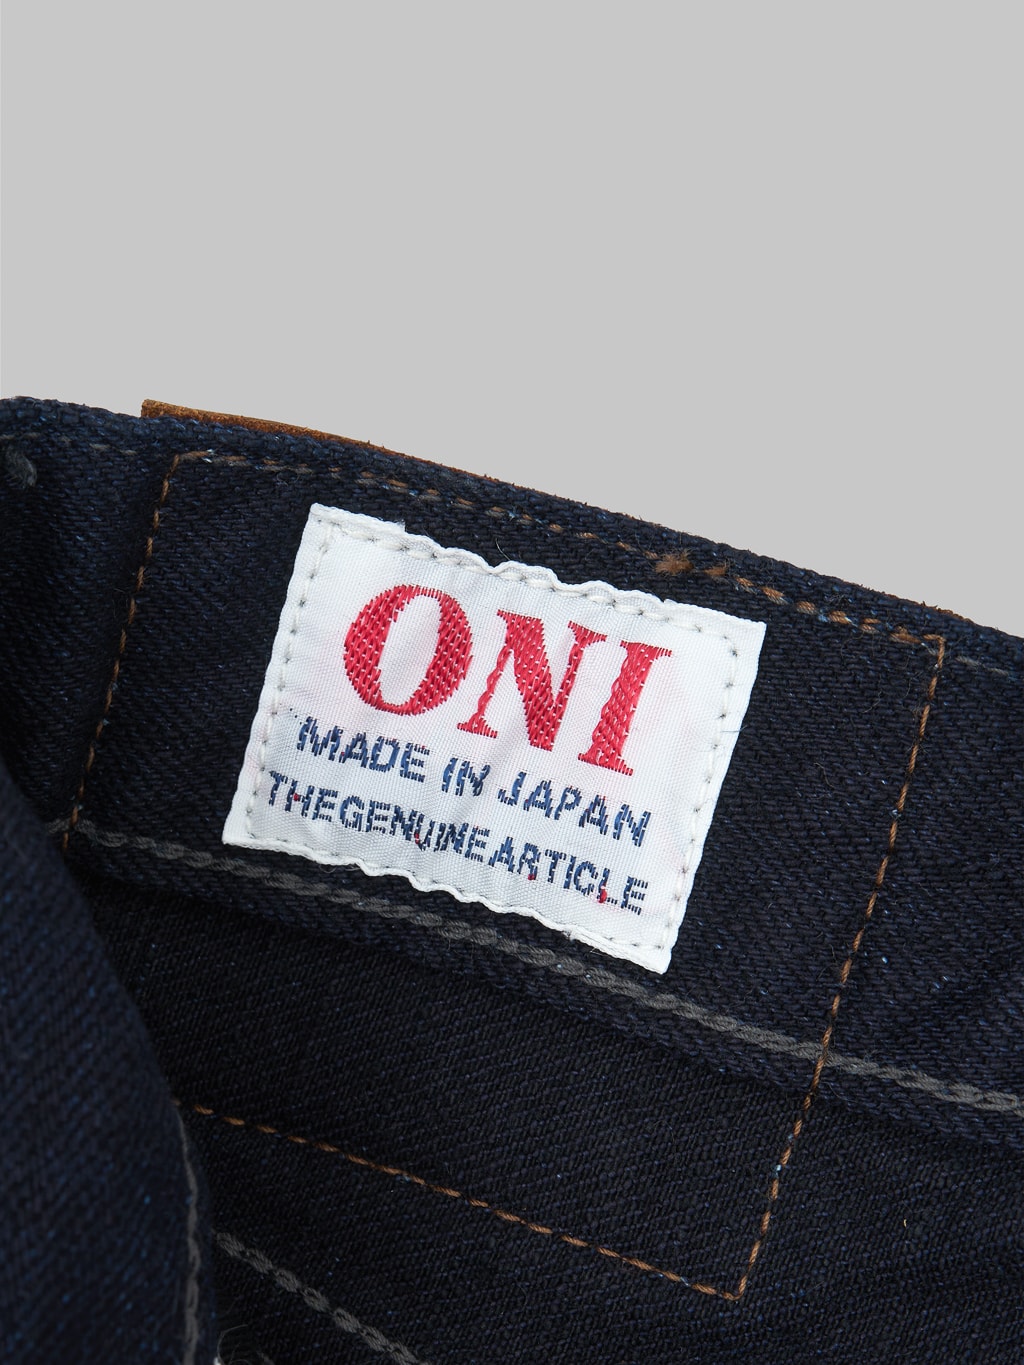 ONI Denim 622 Black Weft 14oz Relaxed Tapered Jeans tag